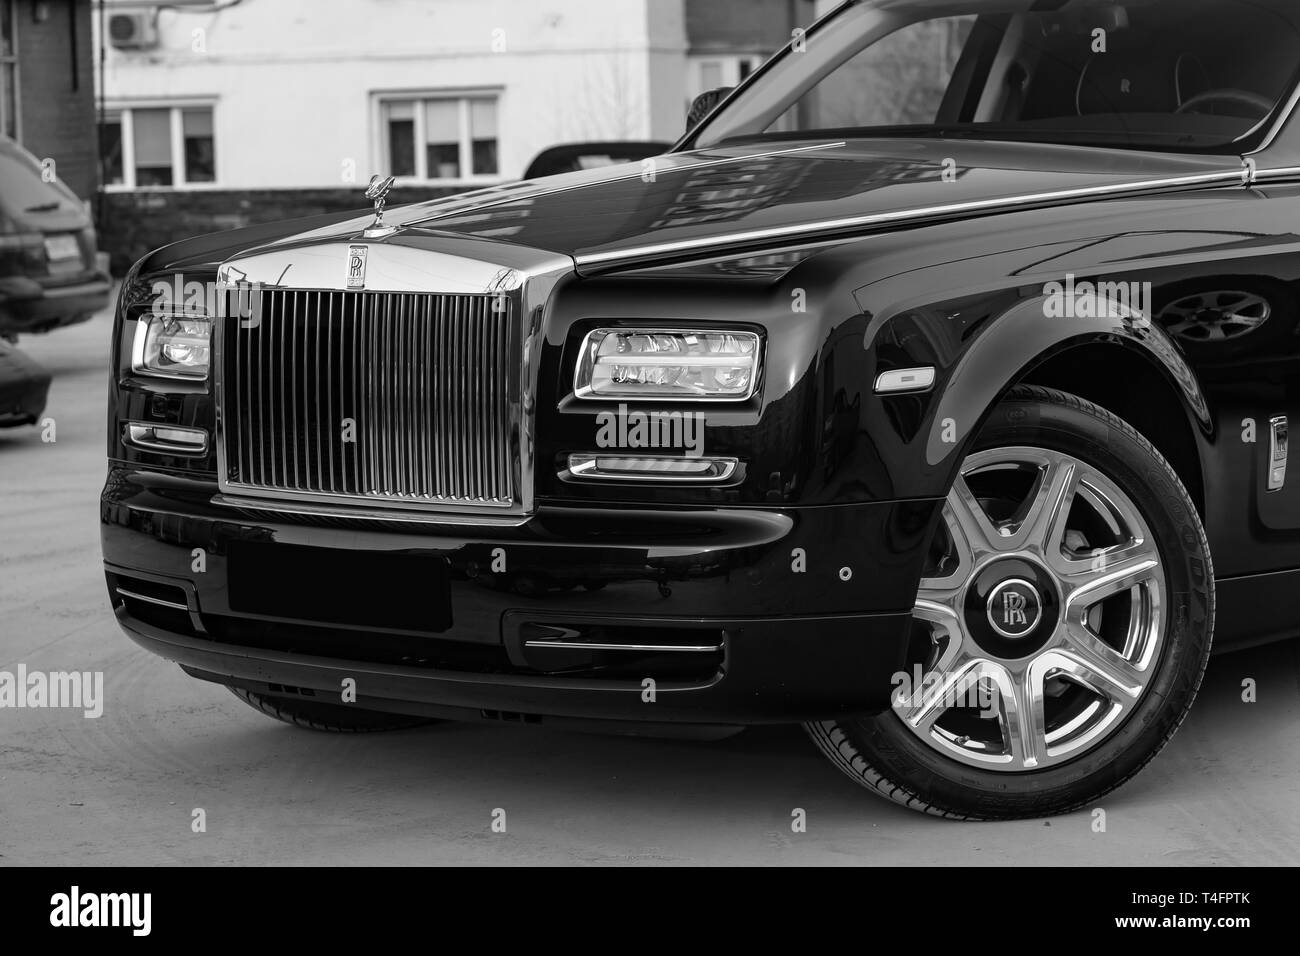 Novosibirsk, Russia - 04.11.2019: Front view of new a very expensive luxury Rolls Royce Phantom car, a long black limousine, model outdoors, prepared  Stock Photo